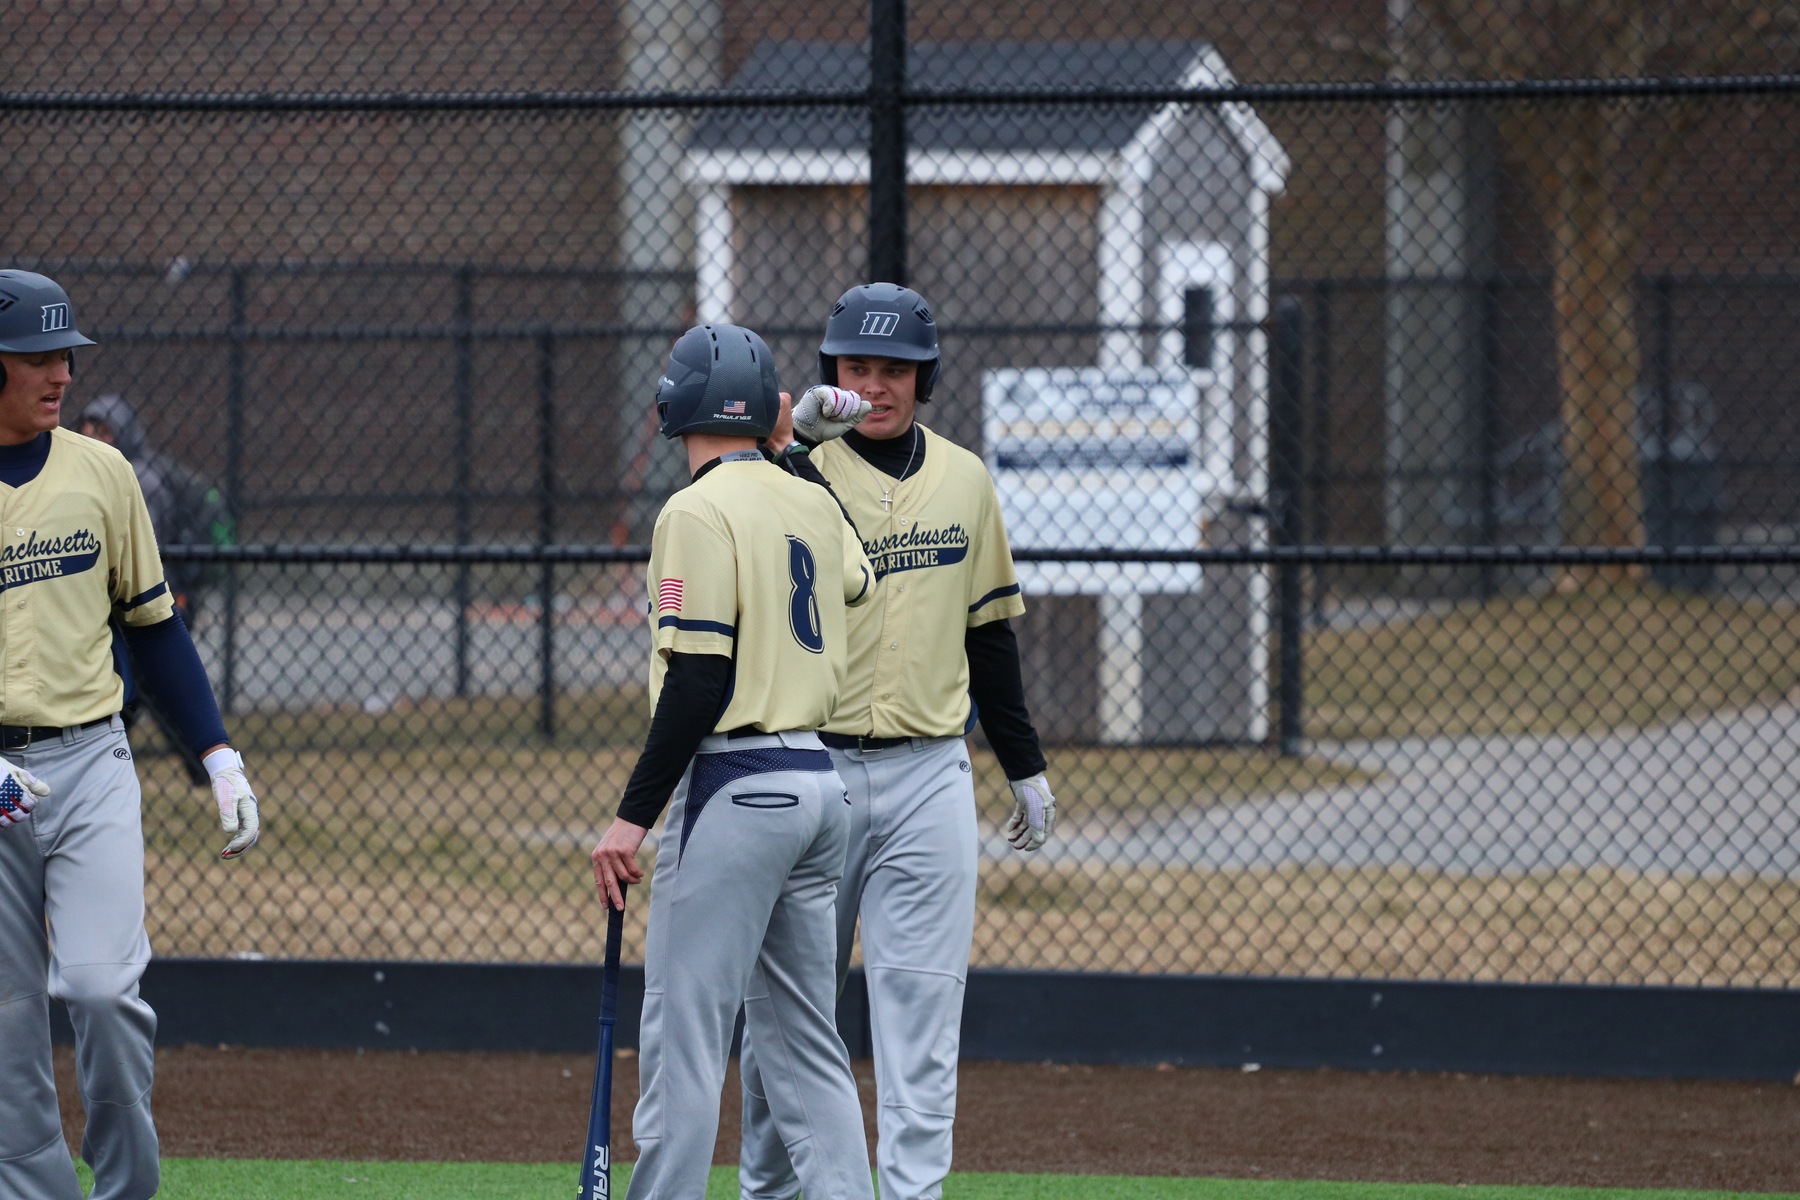 BucBall Splits Conference Doubleheader with Westfield to Avoid Series Sweep